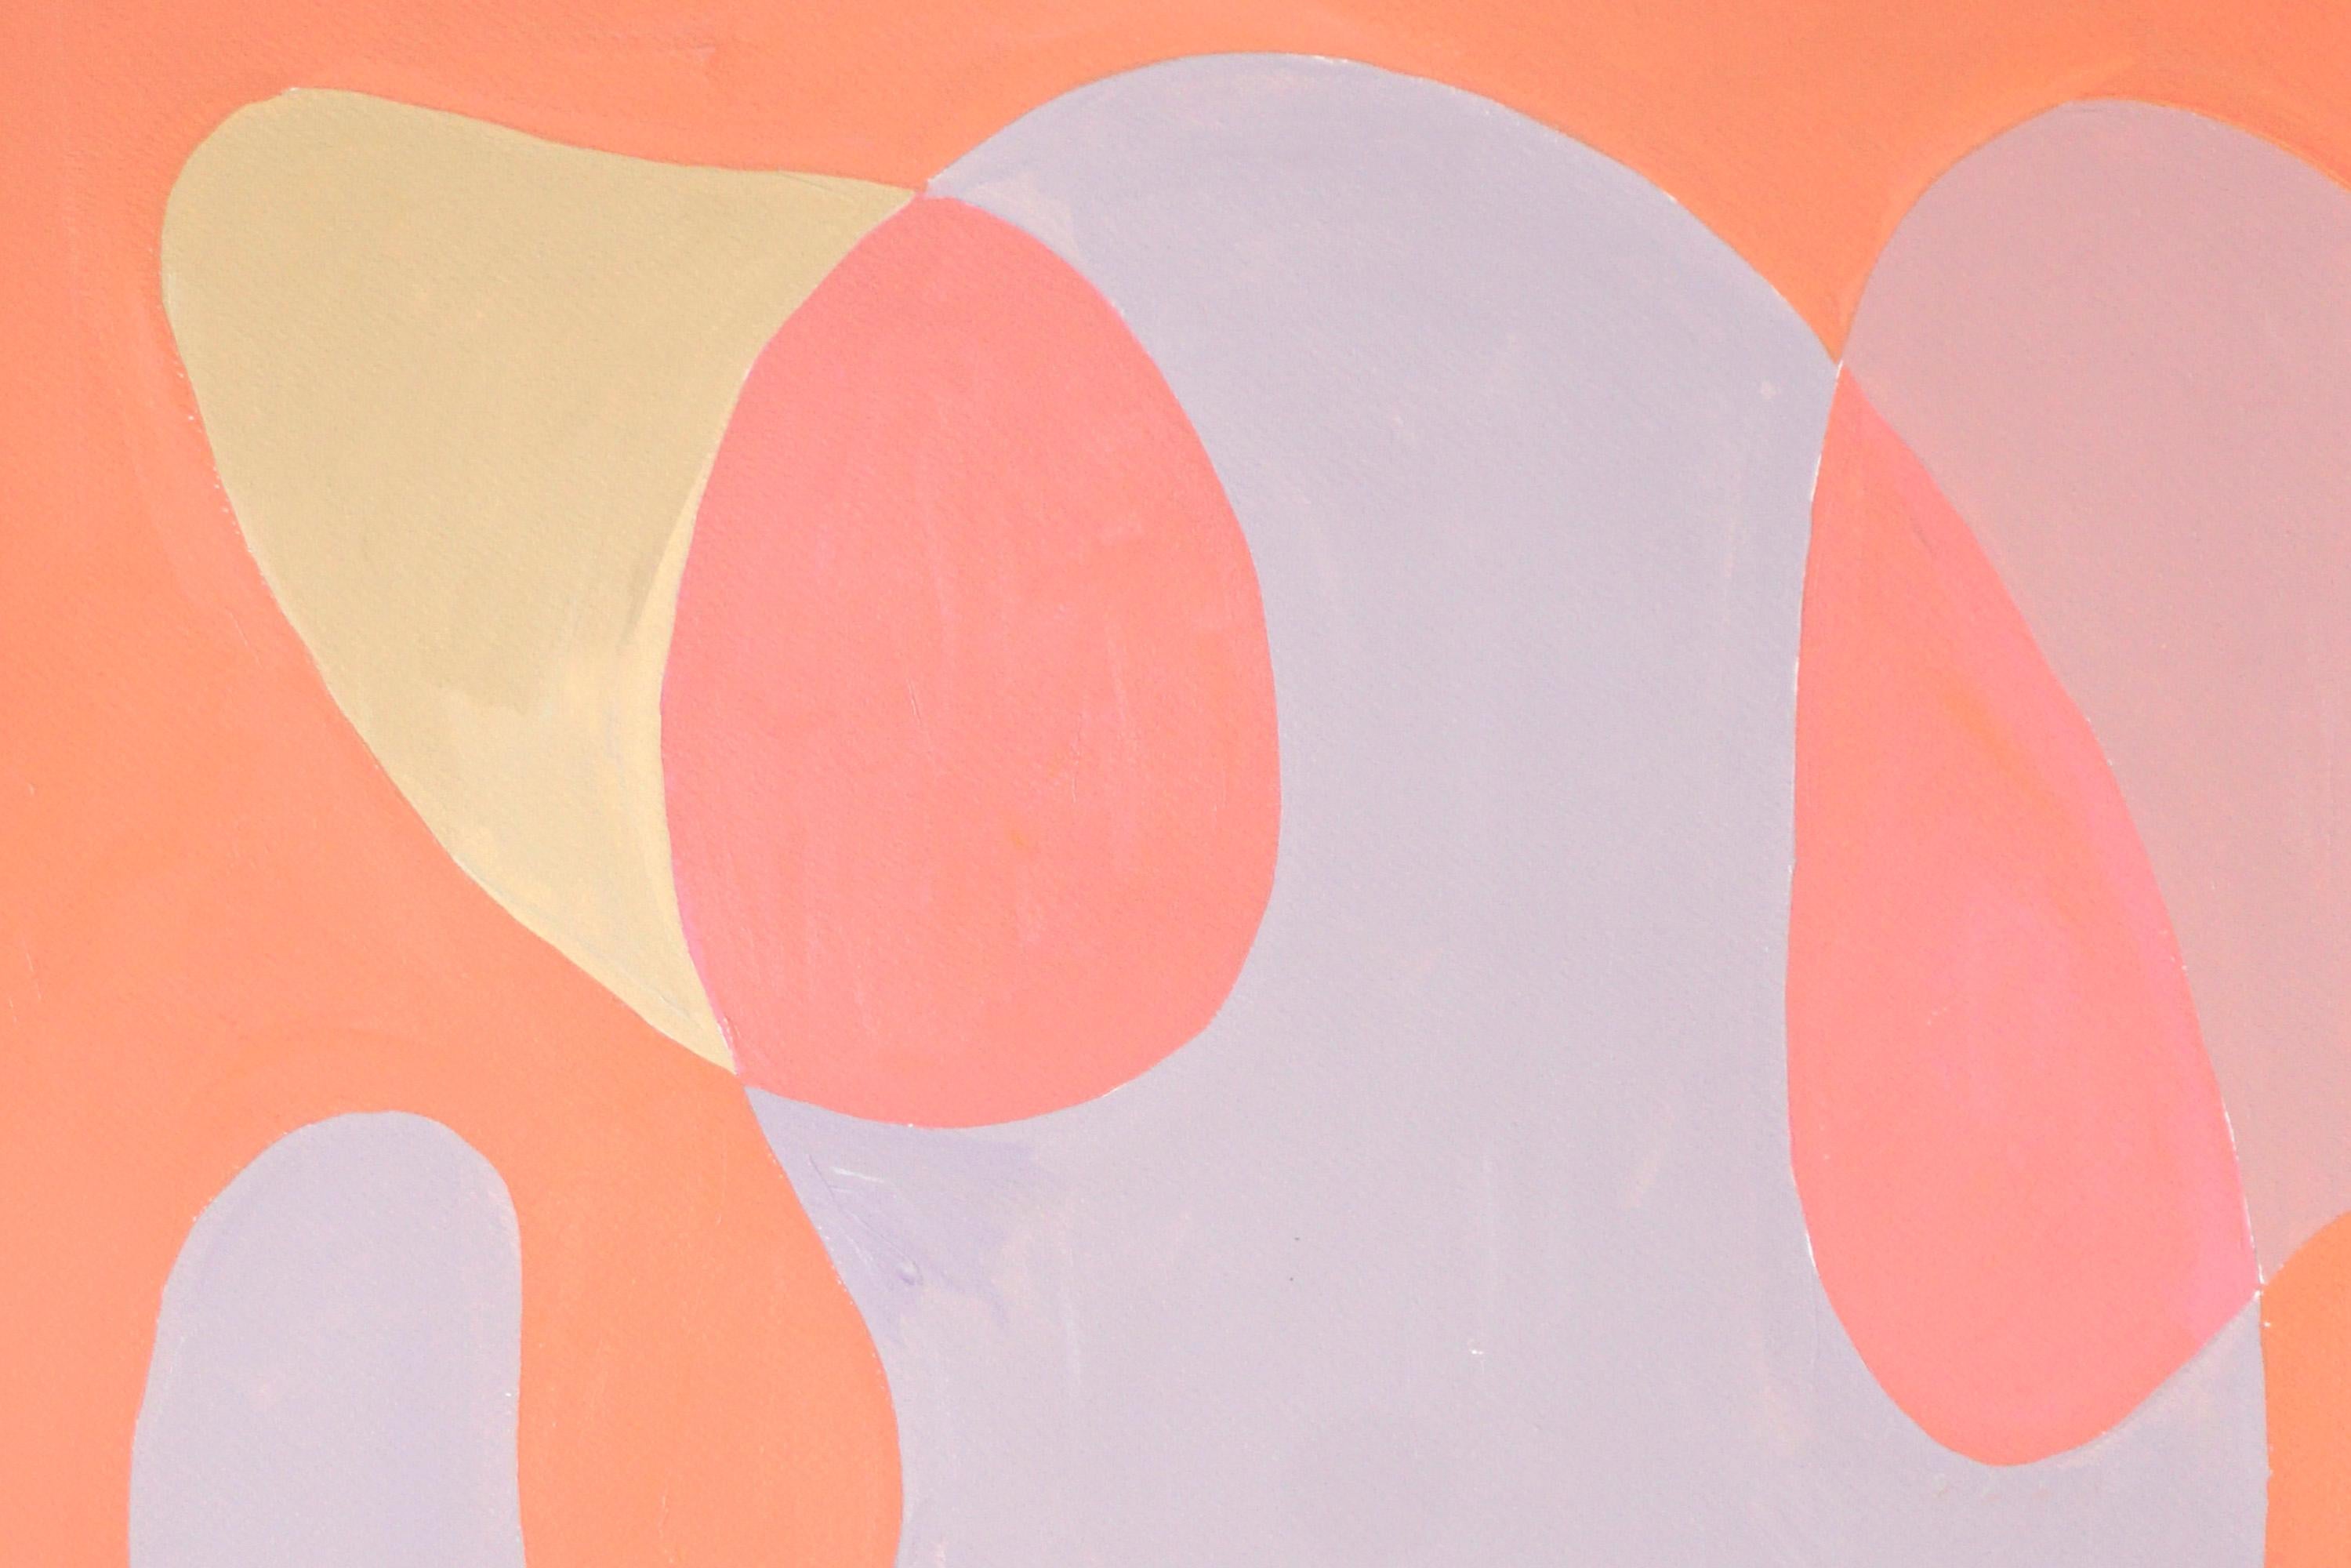 Coral Reef Abstraction, Pastel Tones Triptych Pink and Mauve, Post-Modern Shapes 4